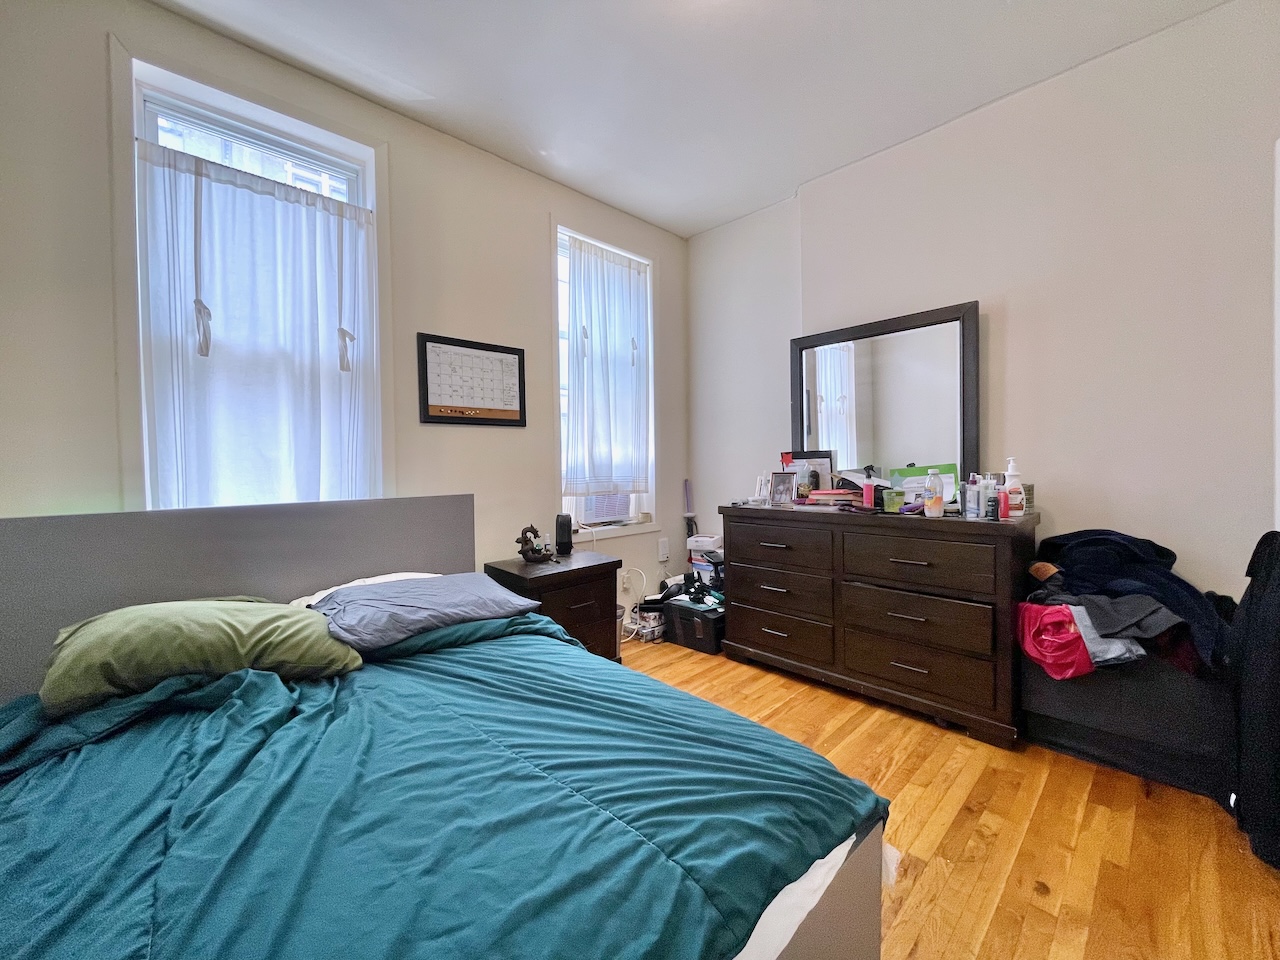 This apartment features a sun-filled bedroom, spacious shared backyard, and kitchen with shaker style cabinets. Located in a great Midtown Hoboken location, allowing for easy transportation for commuters who can also enjoy close proximity to great restaurants, shopping, and parks. Available July 1st!